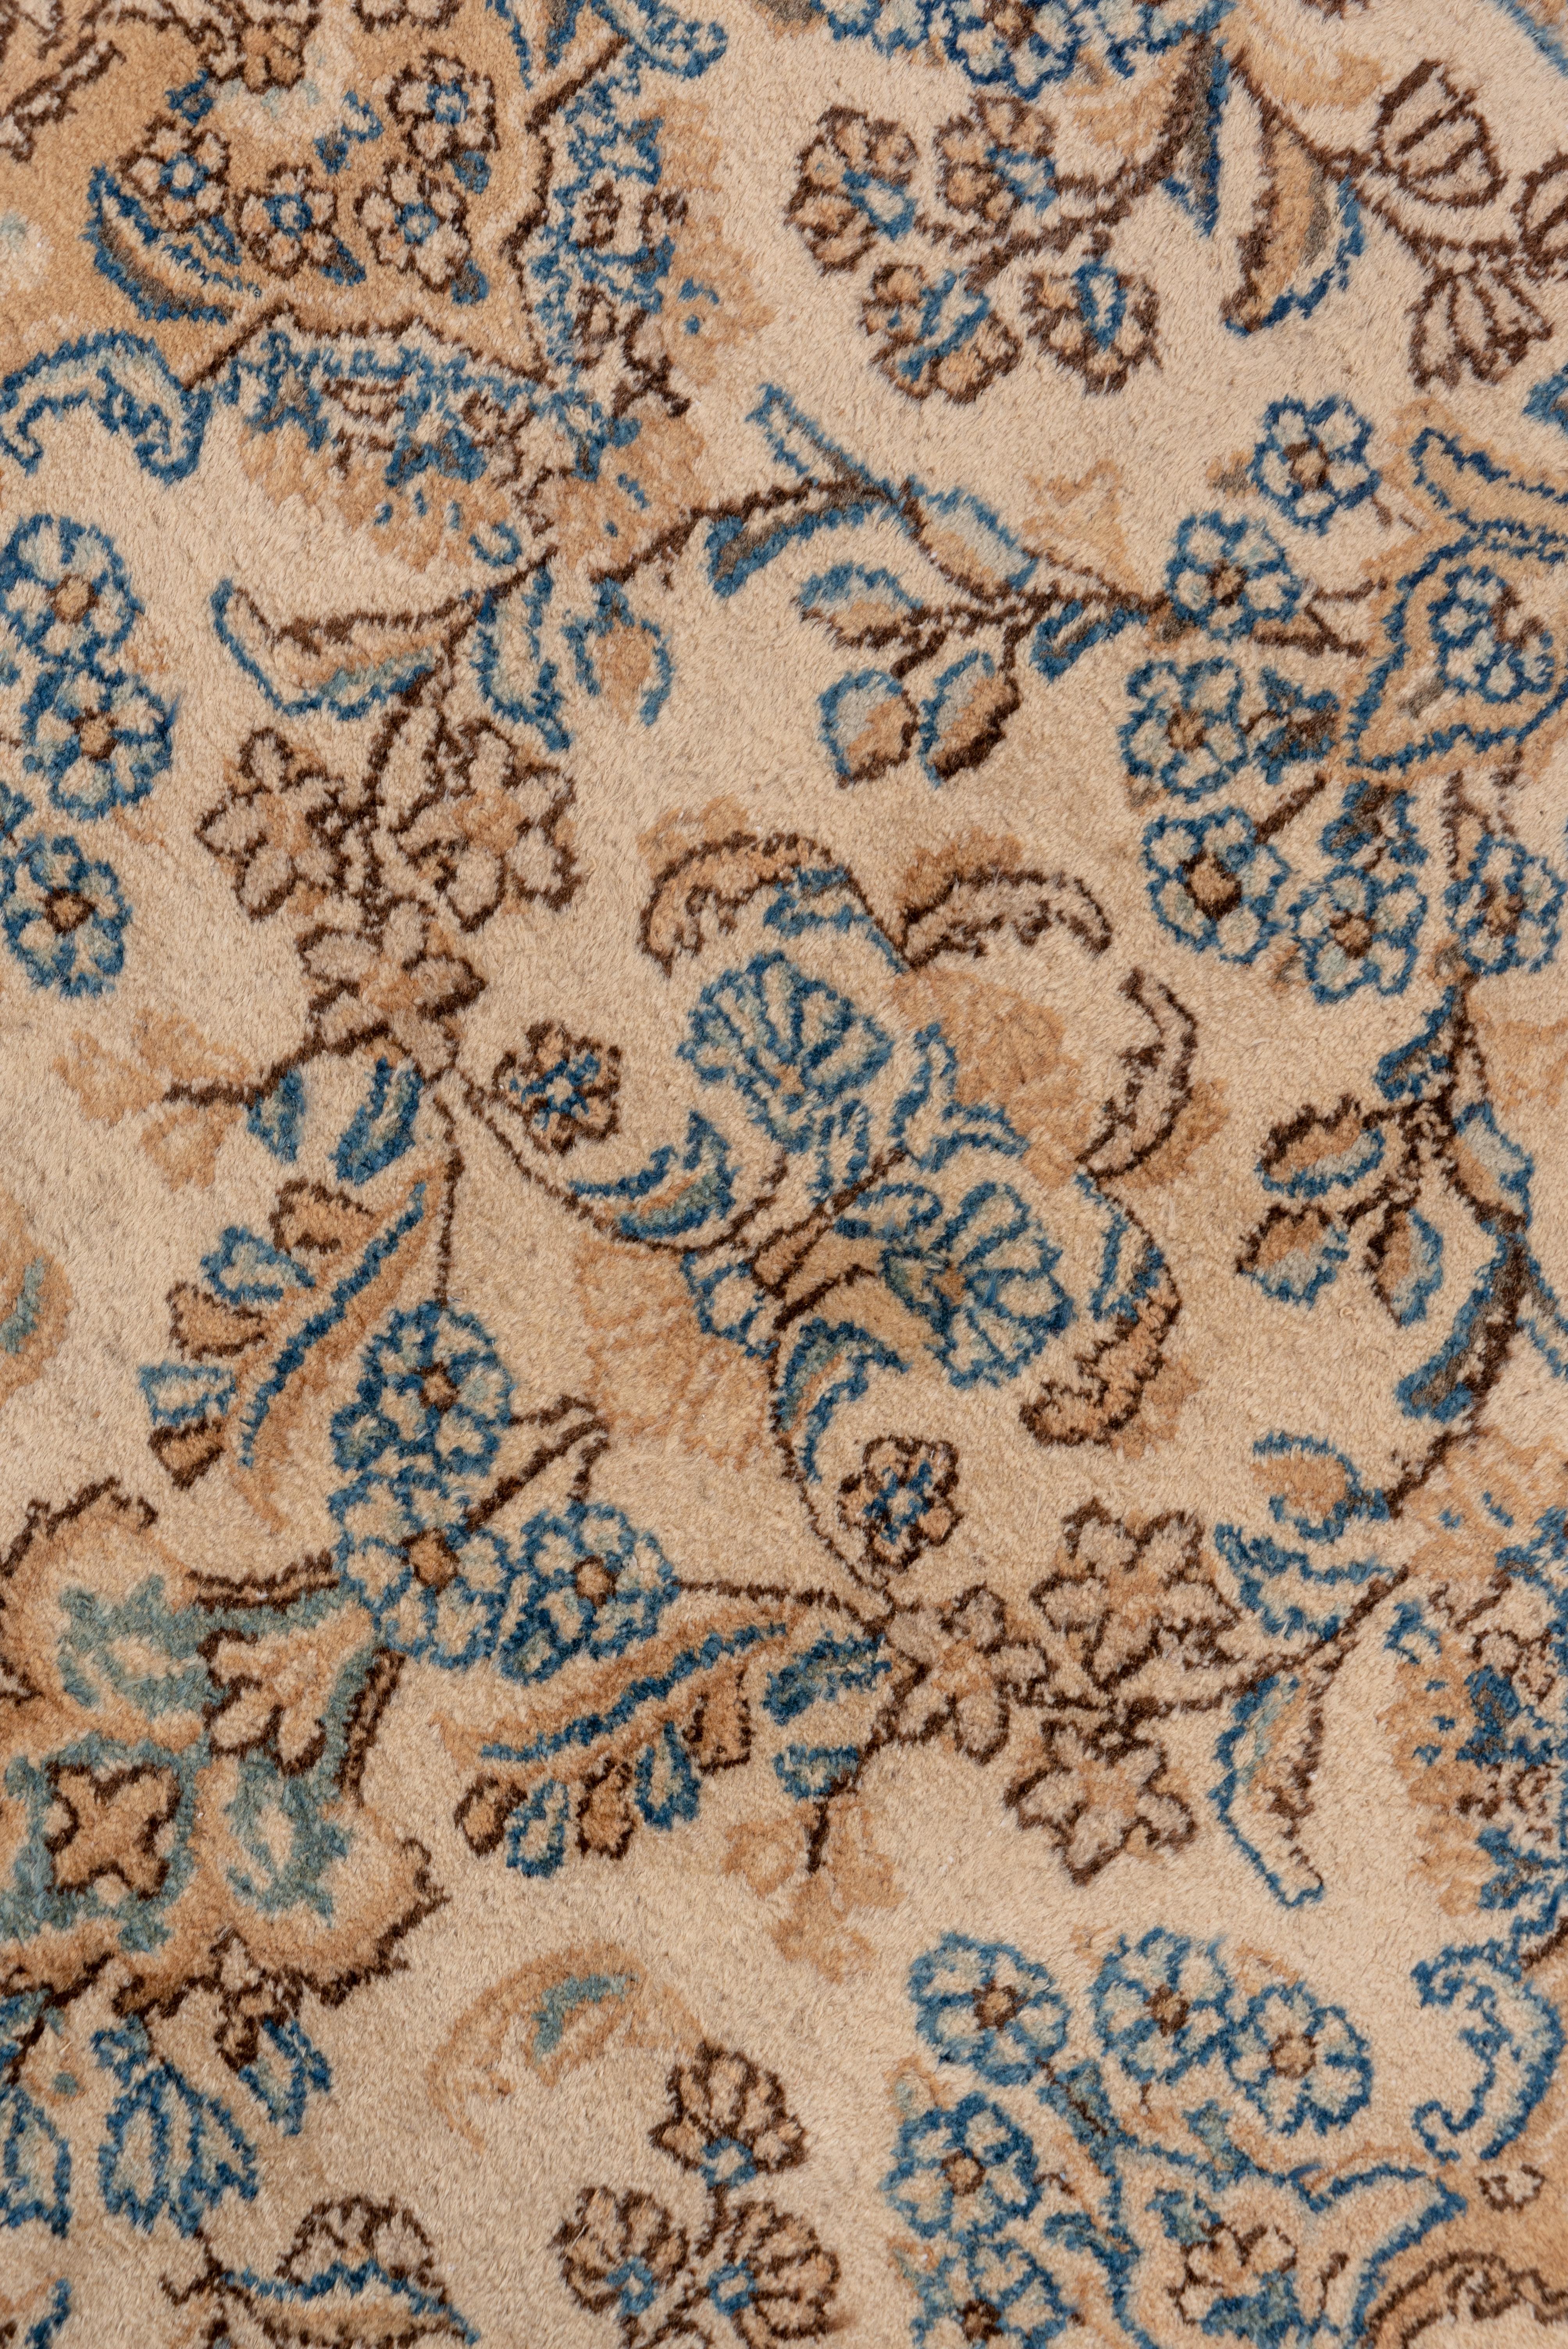 This ivory ground SE Persian city runner displays a detached flower spray pattern in light blue, sienna brown, pistachio, buff, salmon and tan, all within a same-colored broken border featuring flower head arrays.